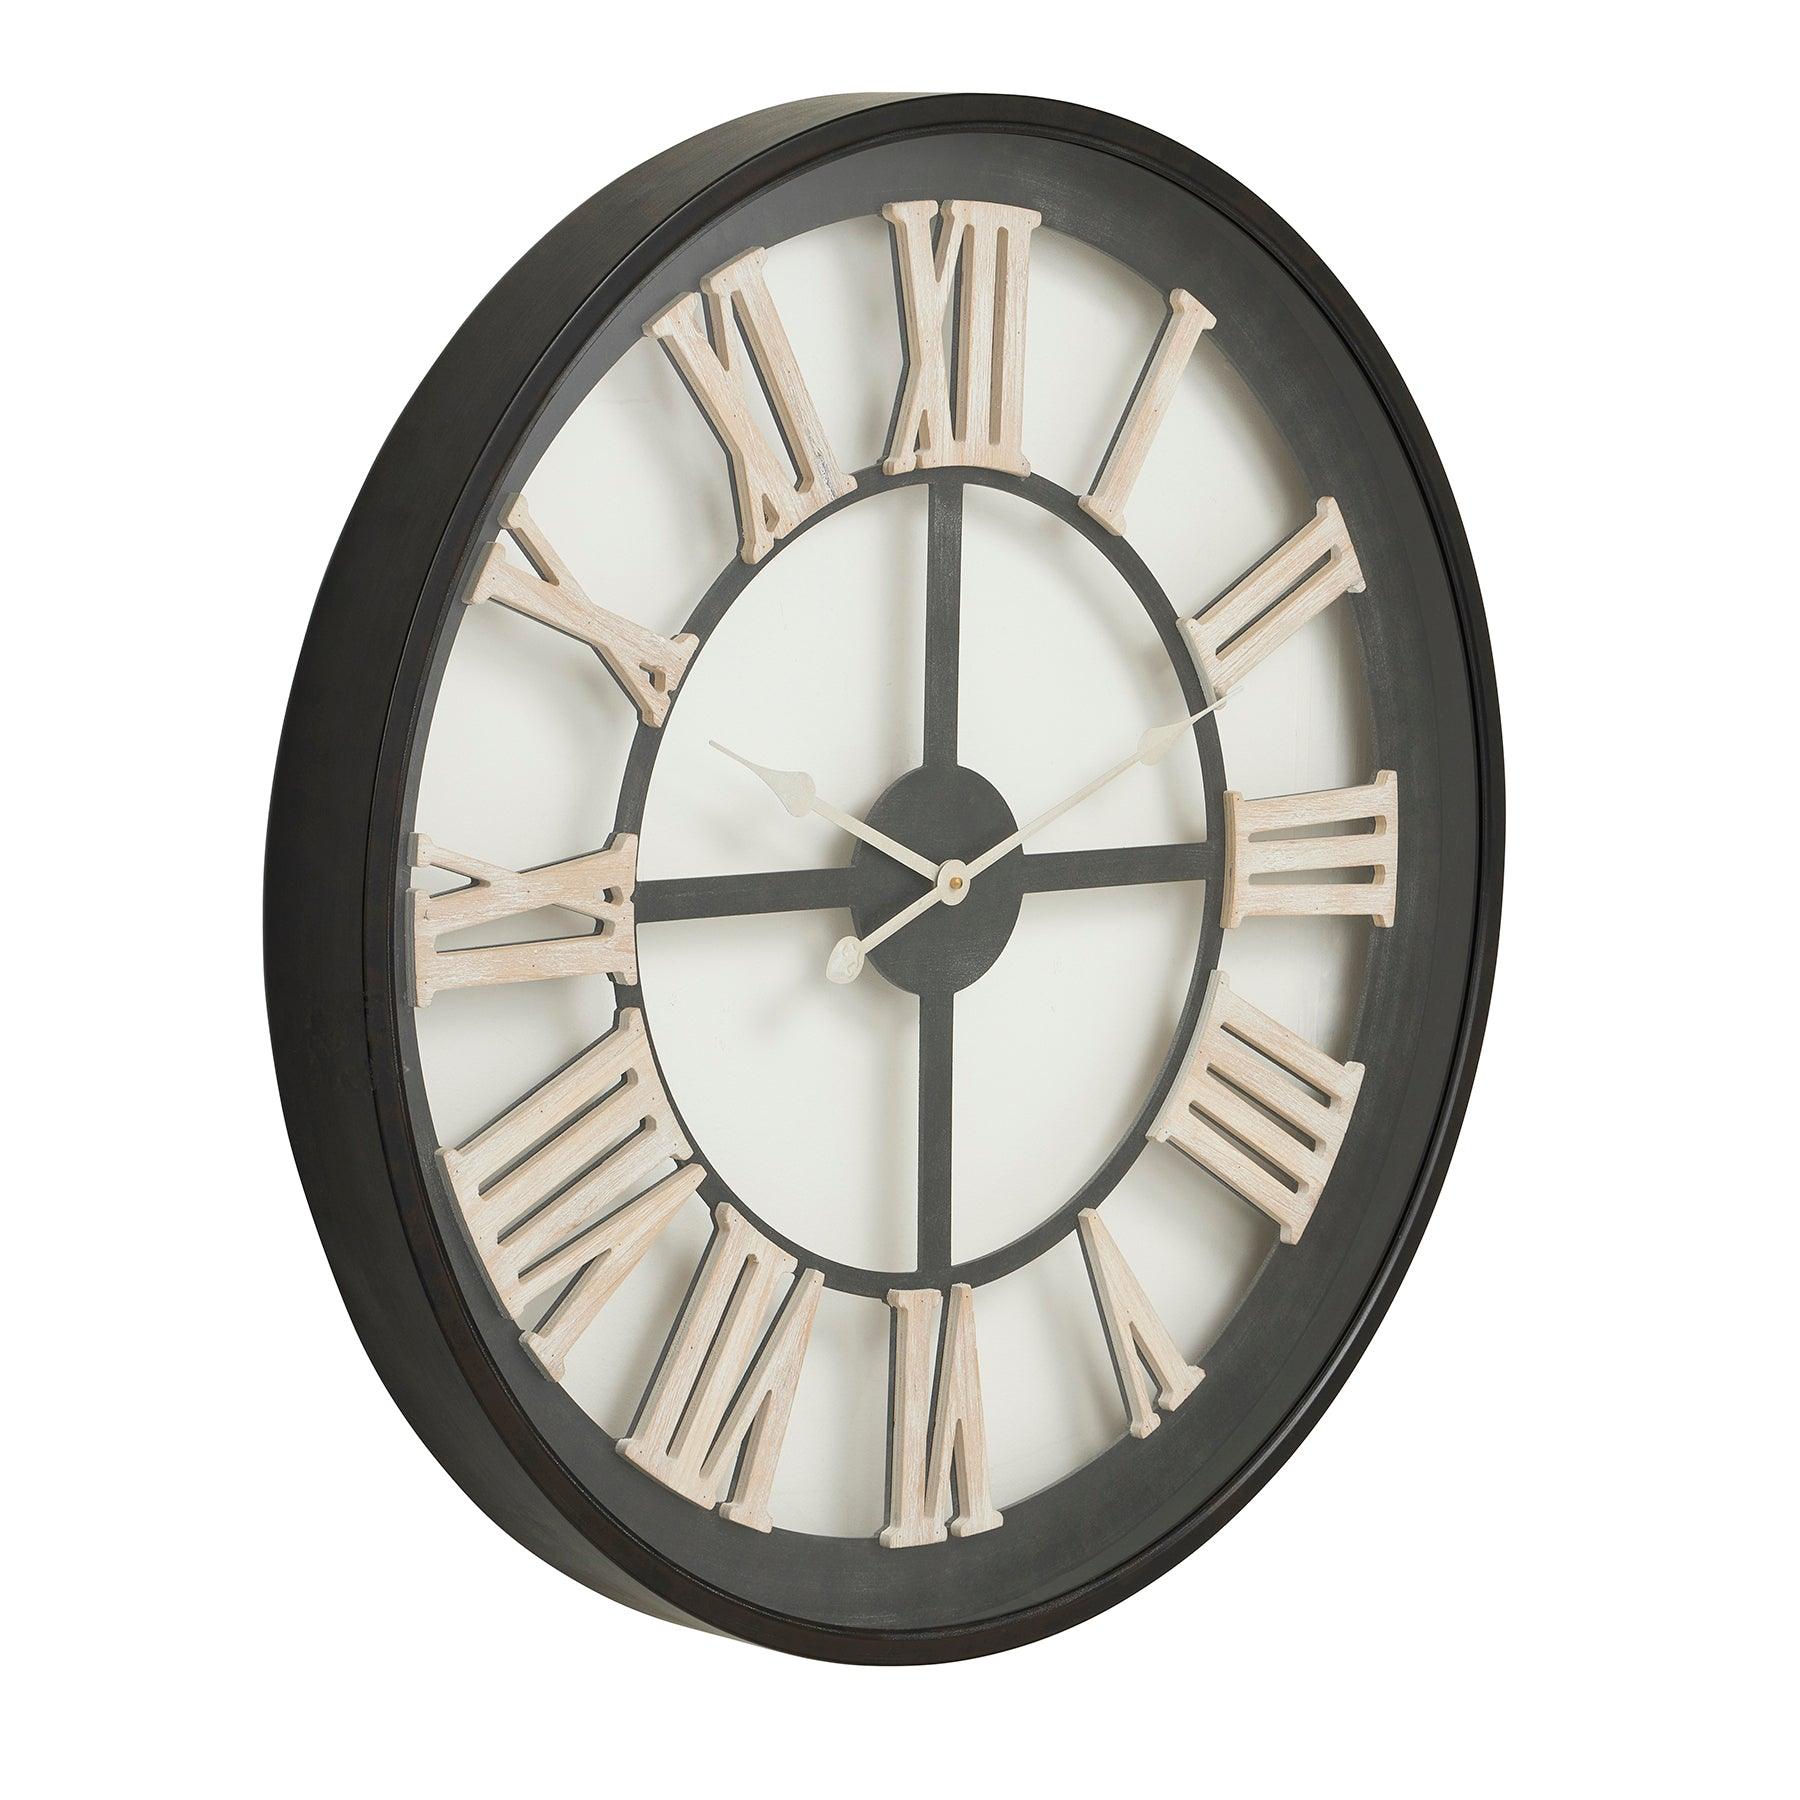 Black Framed Skeleton Clock With White Roman Numerals - £189.95 - Wall Clocks 